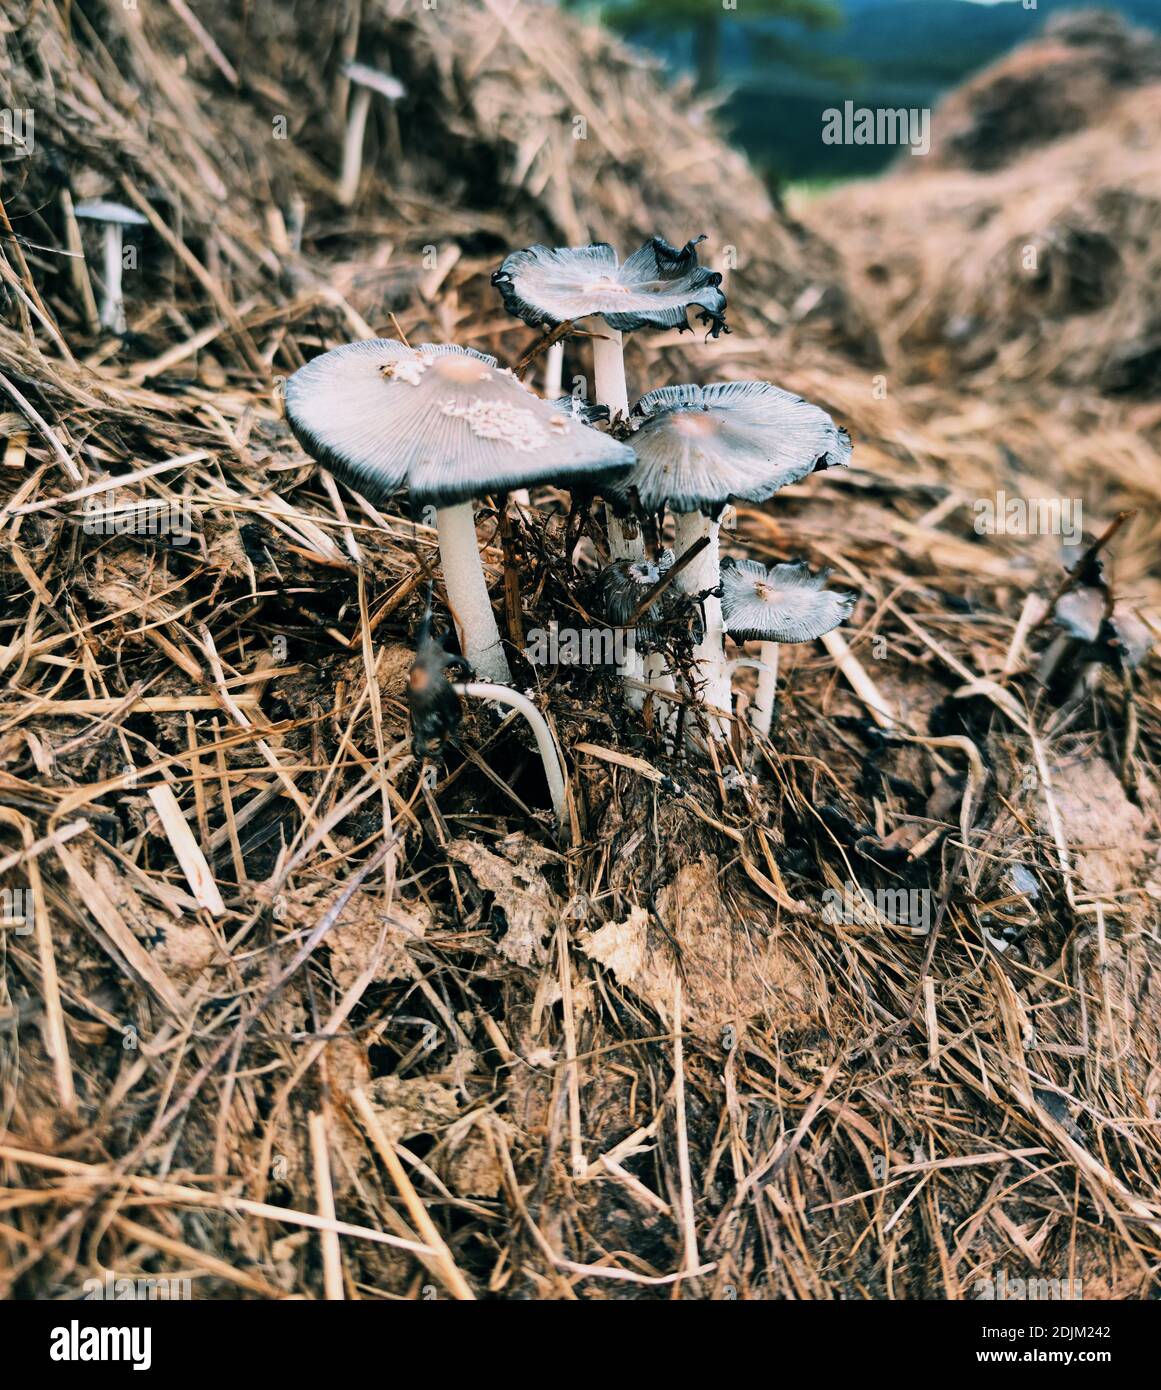 inedible unknown mushrooms grow on a dung heap Stock Photo